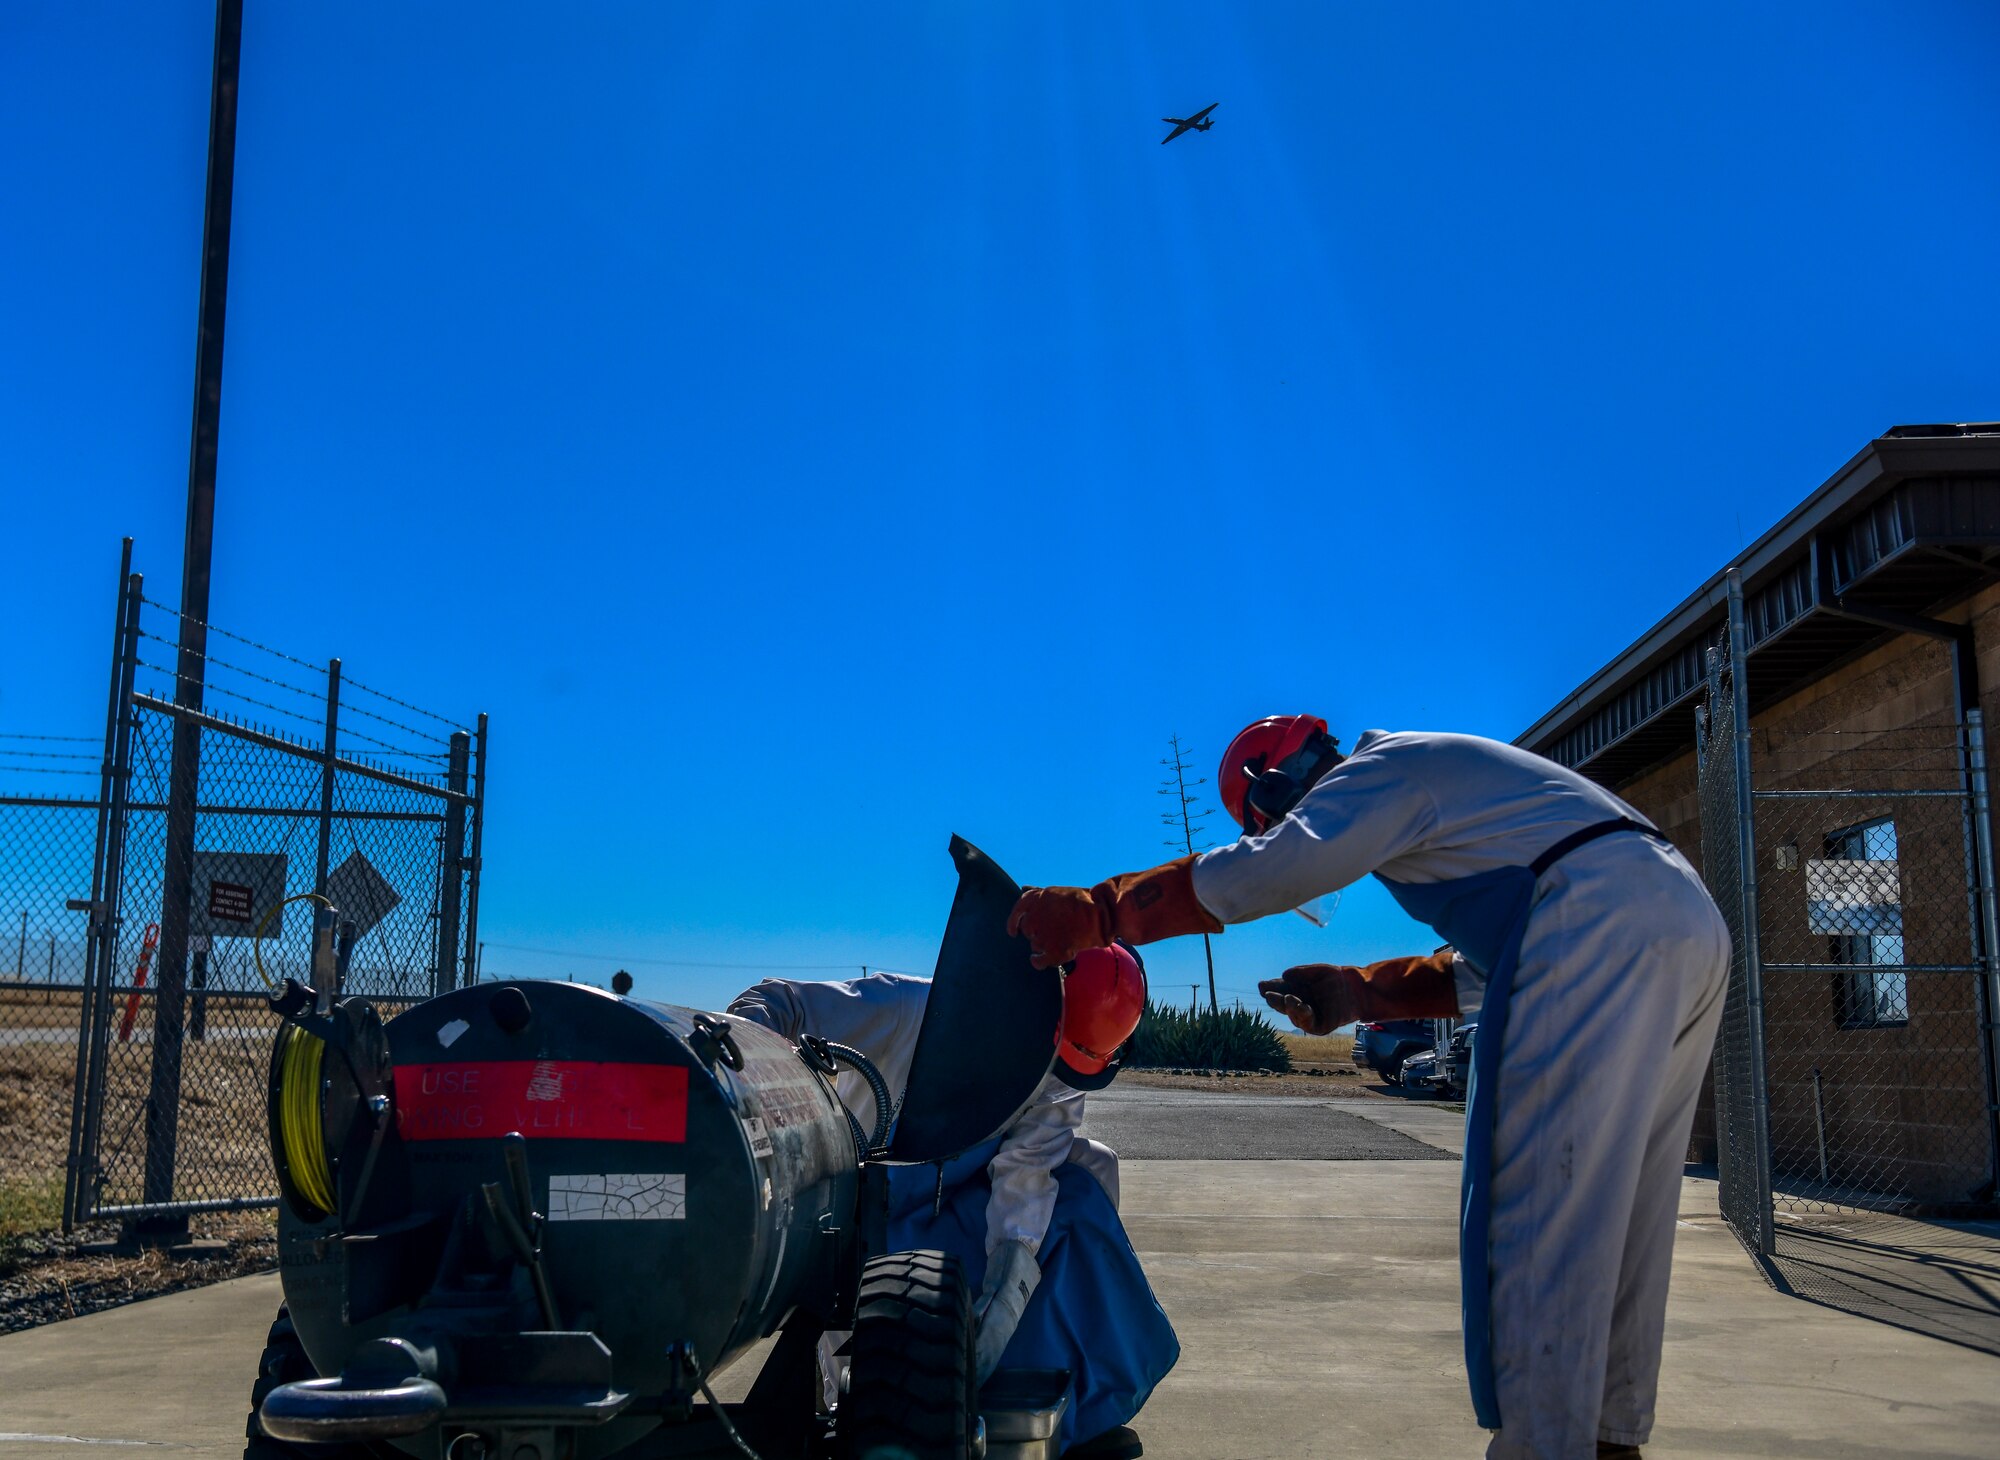 Senior Airman Verdes Cato, observes Airman 1st Class Randy Willis 9th Logistic Readiness Squadron cryogenics technician, as he carefully handles Liquid Oxygen (LOX), while a U-2 Dragon Lady flies over at Beale Air Force Base, California, July 21, 2022.